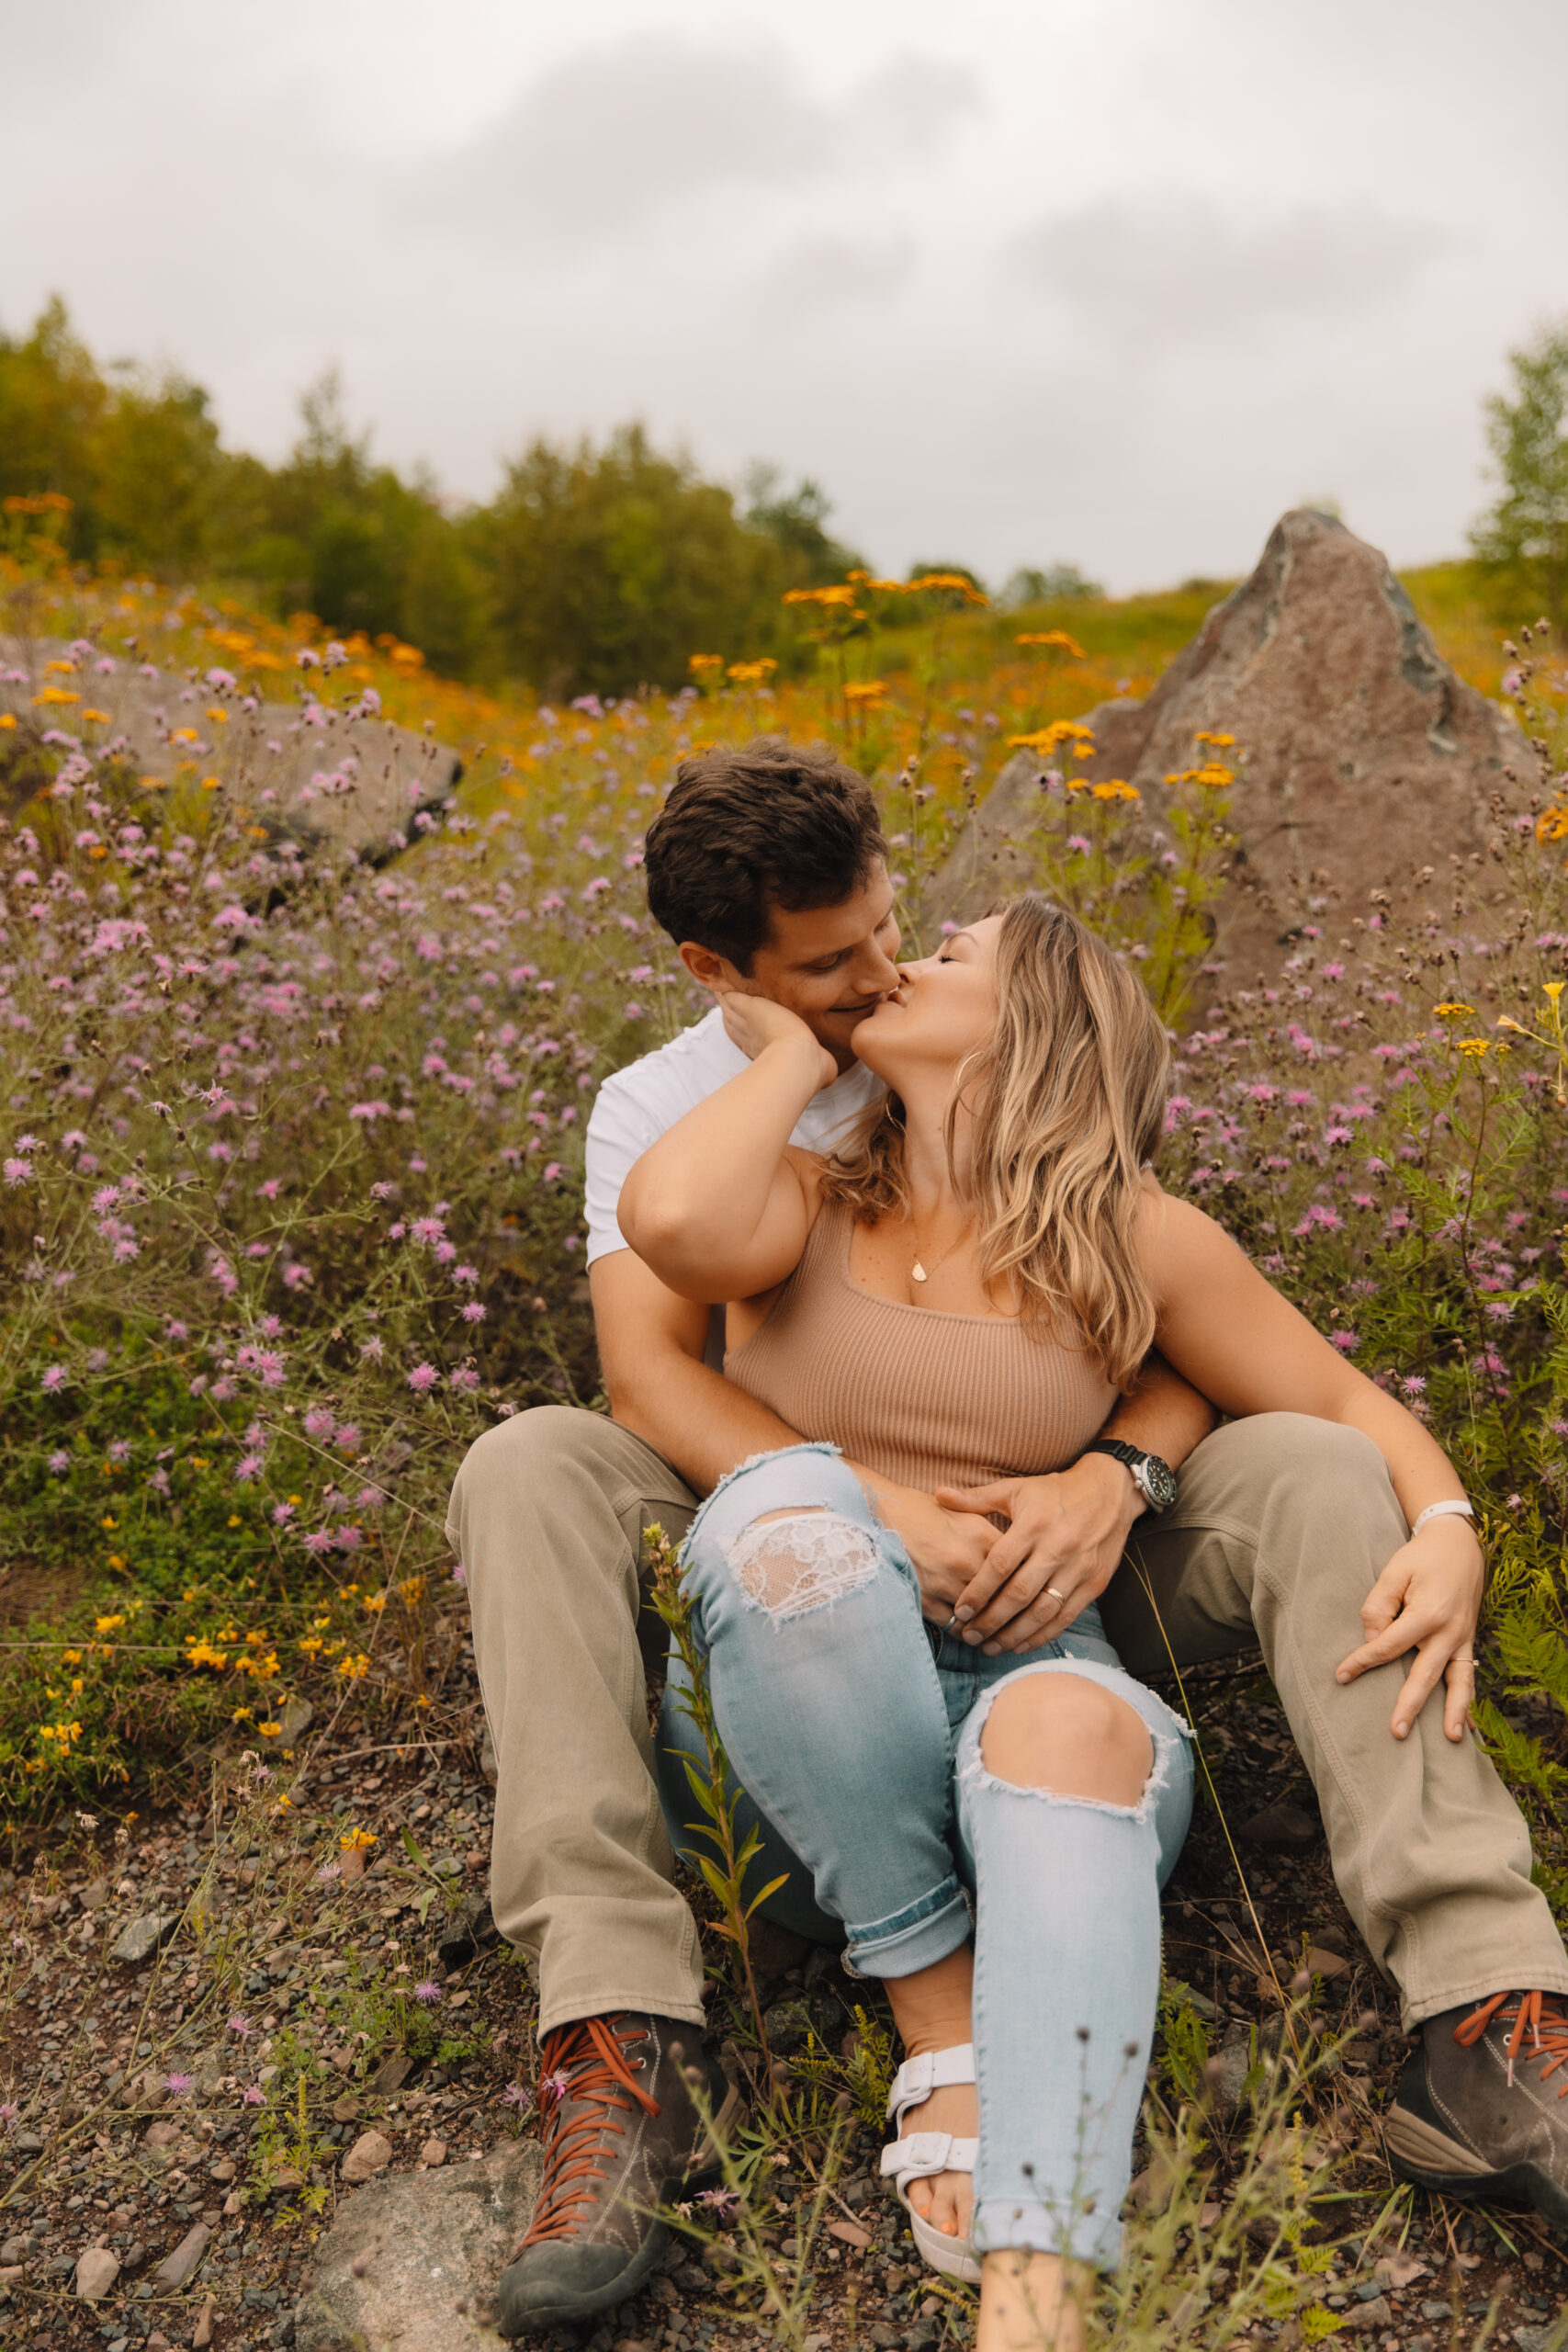 A couple sits among wildflowers and rocks, with the man embracing the woman from behind as they kiss.